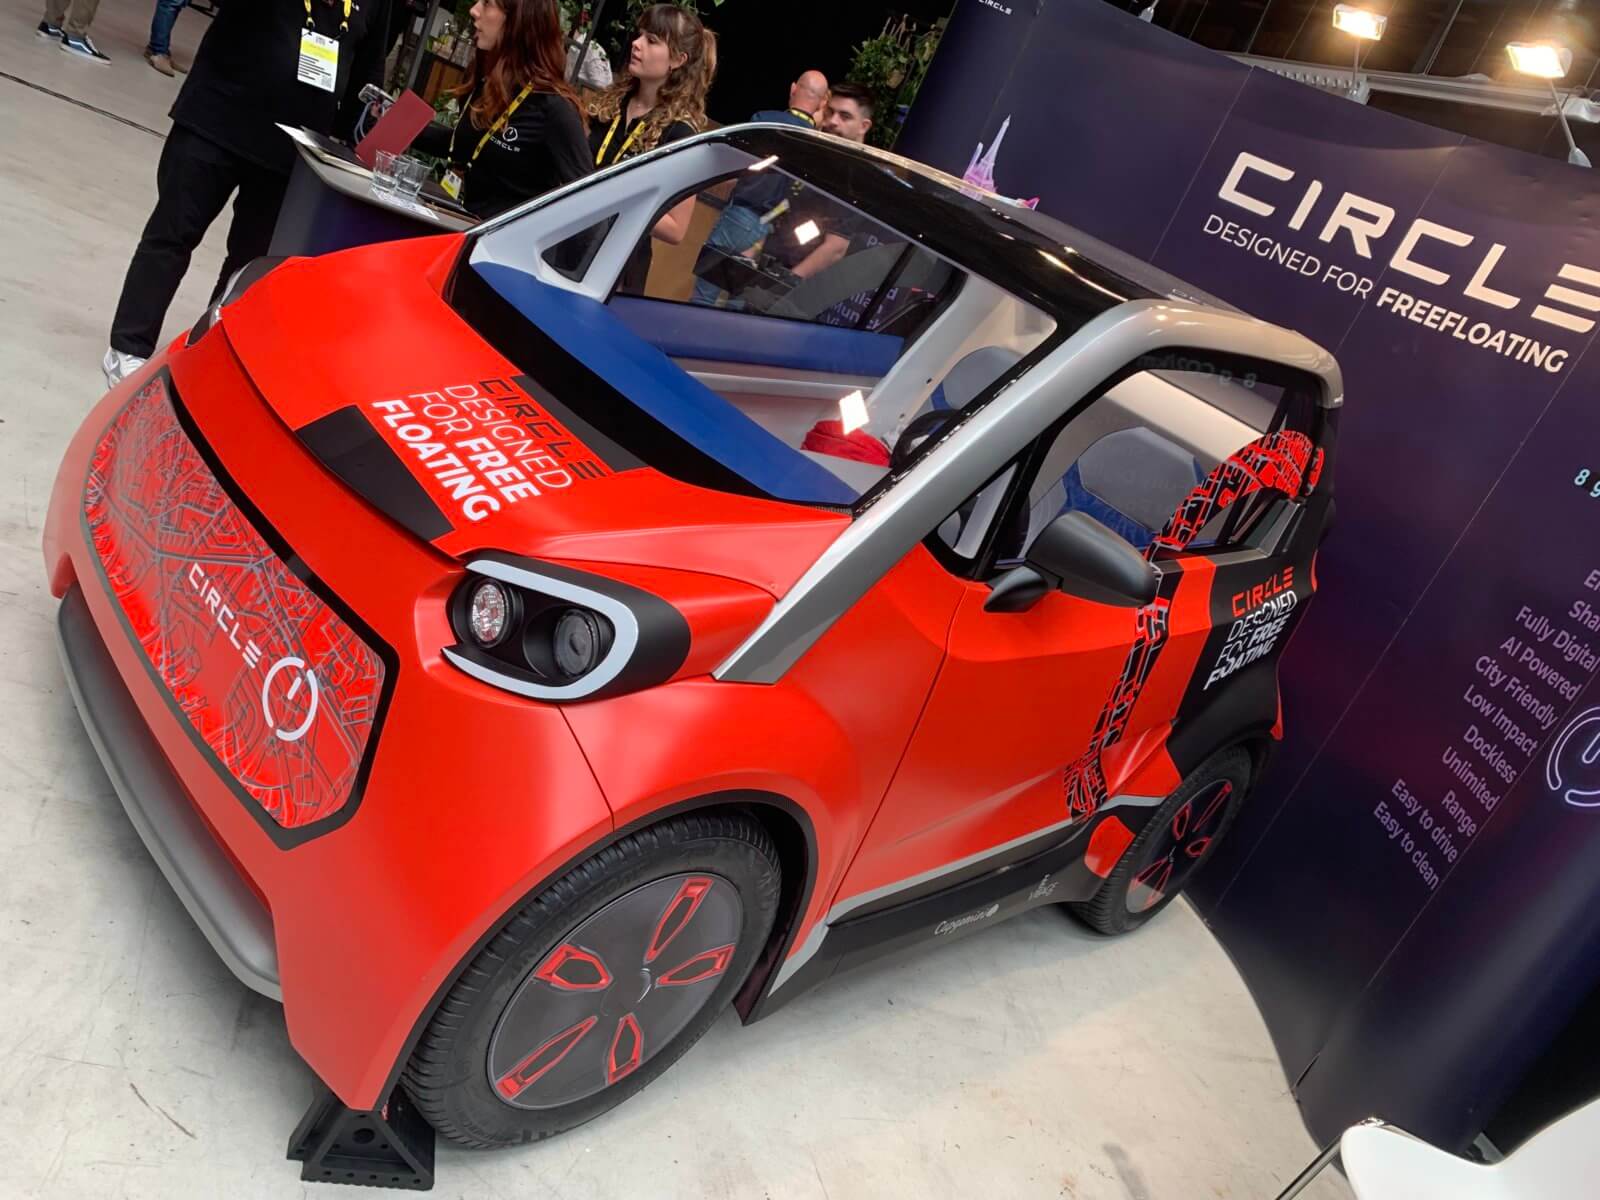 A vibrant red and black Circle electric city car on display, with text 'Designed for Freefloating' across the hood, featuring a modern design with stylized graphics, at an automotive exhibition.